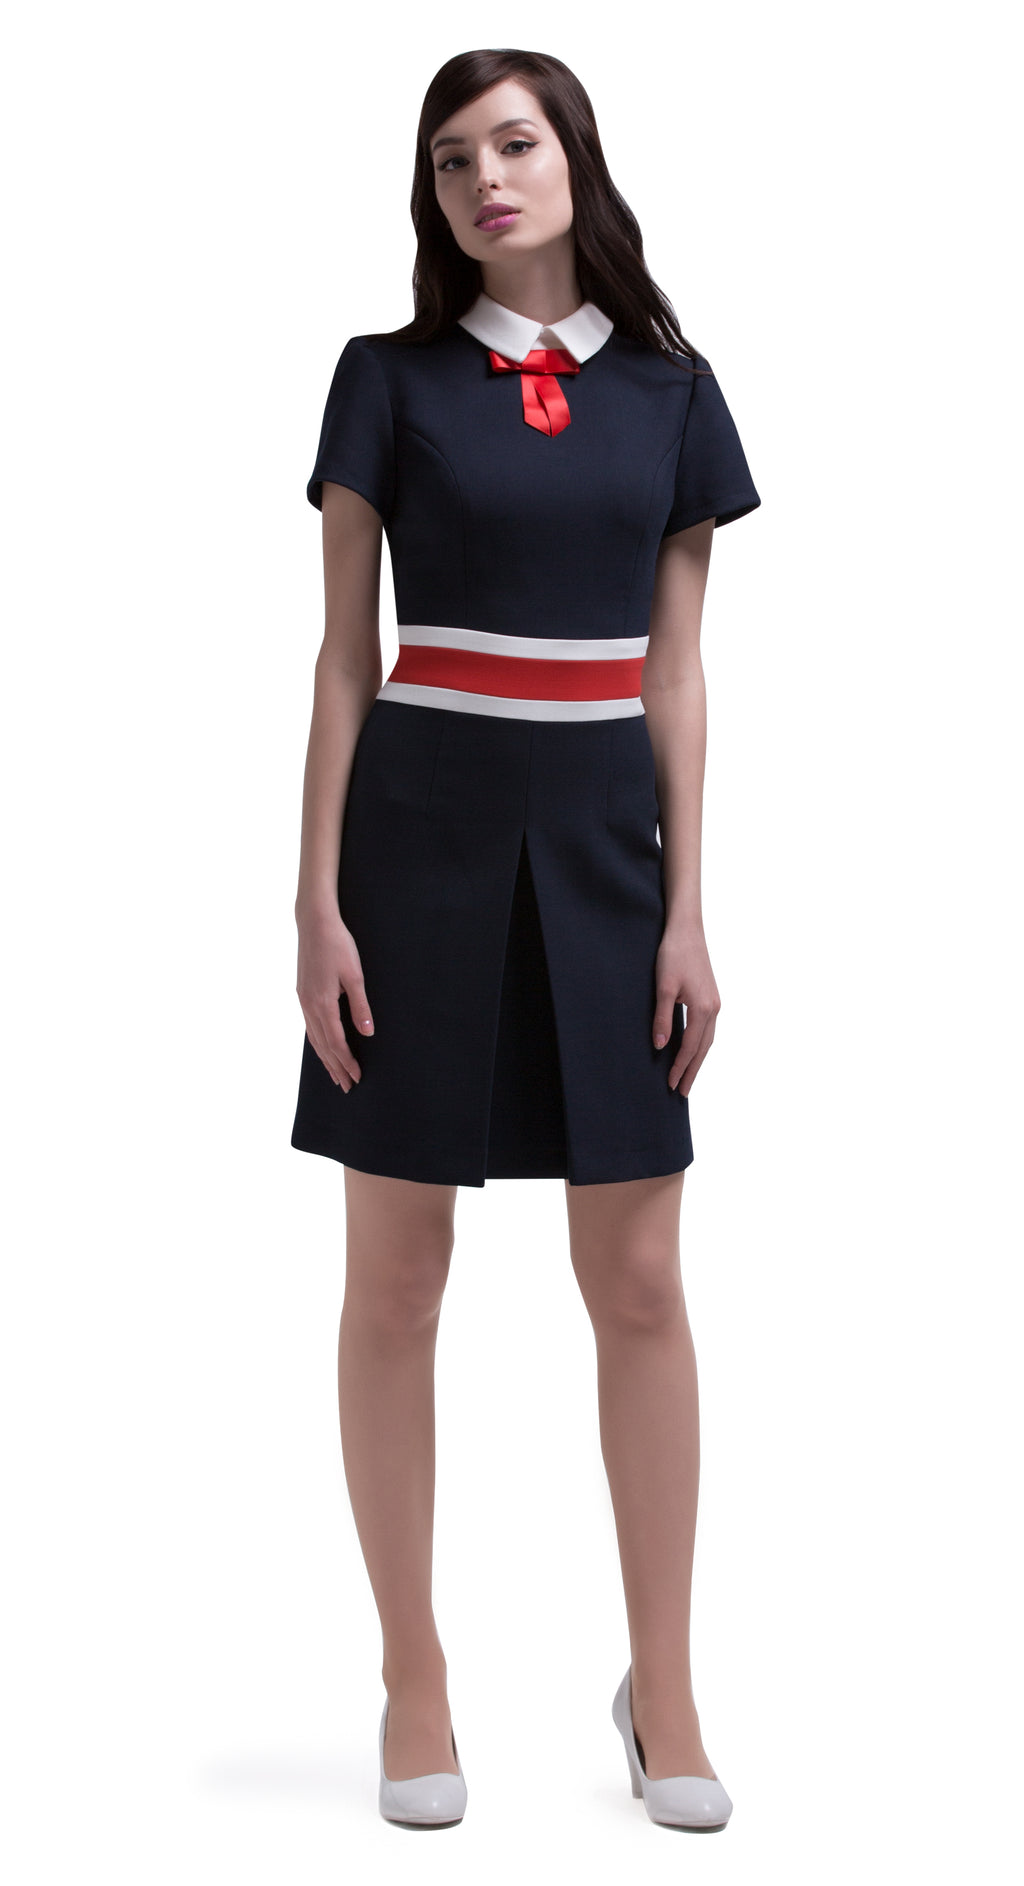 This straight cut, front pleat, tri-colour sixties style dress has contrasting retro bands at the waistline. Made from a navy blue, red and light cream, medium weight Italian mill fabric. Provides some stretch. A small light cream collar with contrasting red bow and short sleeves completes this at work or play versatile Autumn dress.  Pairs perfectly with our matching double breasted coat to create a fabulous high fashion dress/coat set.   Choose bespoke for alternative sleeve lengths.